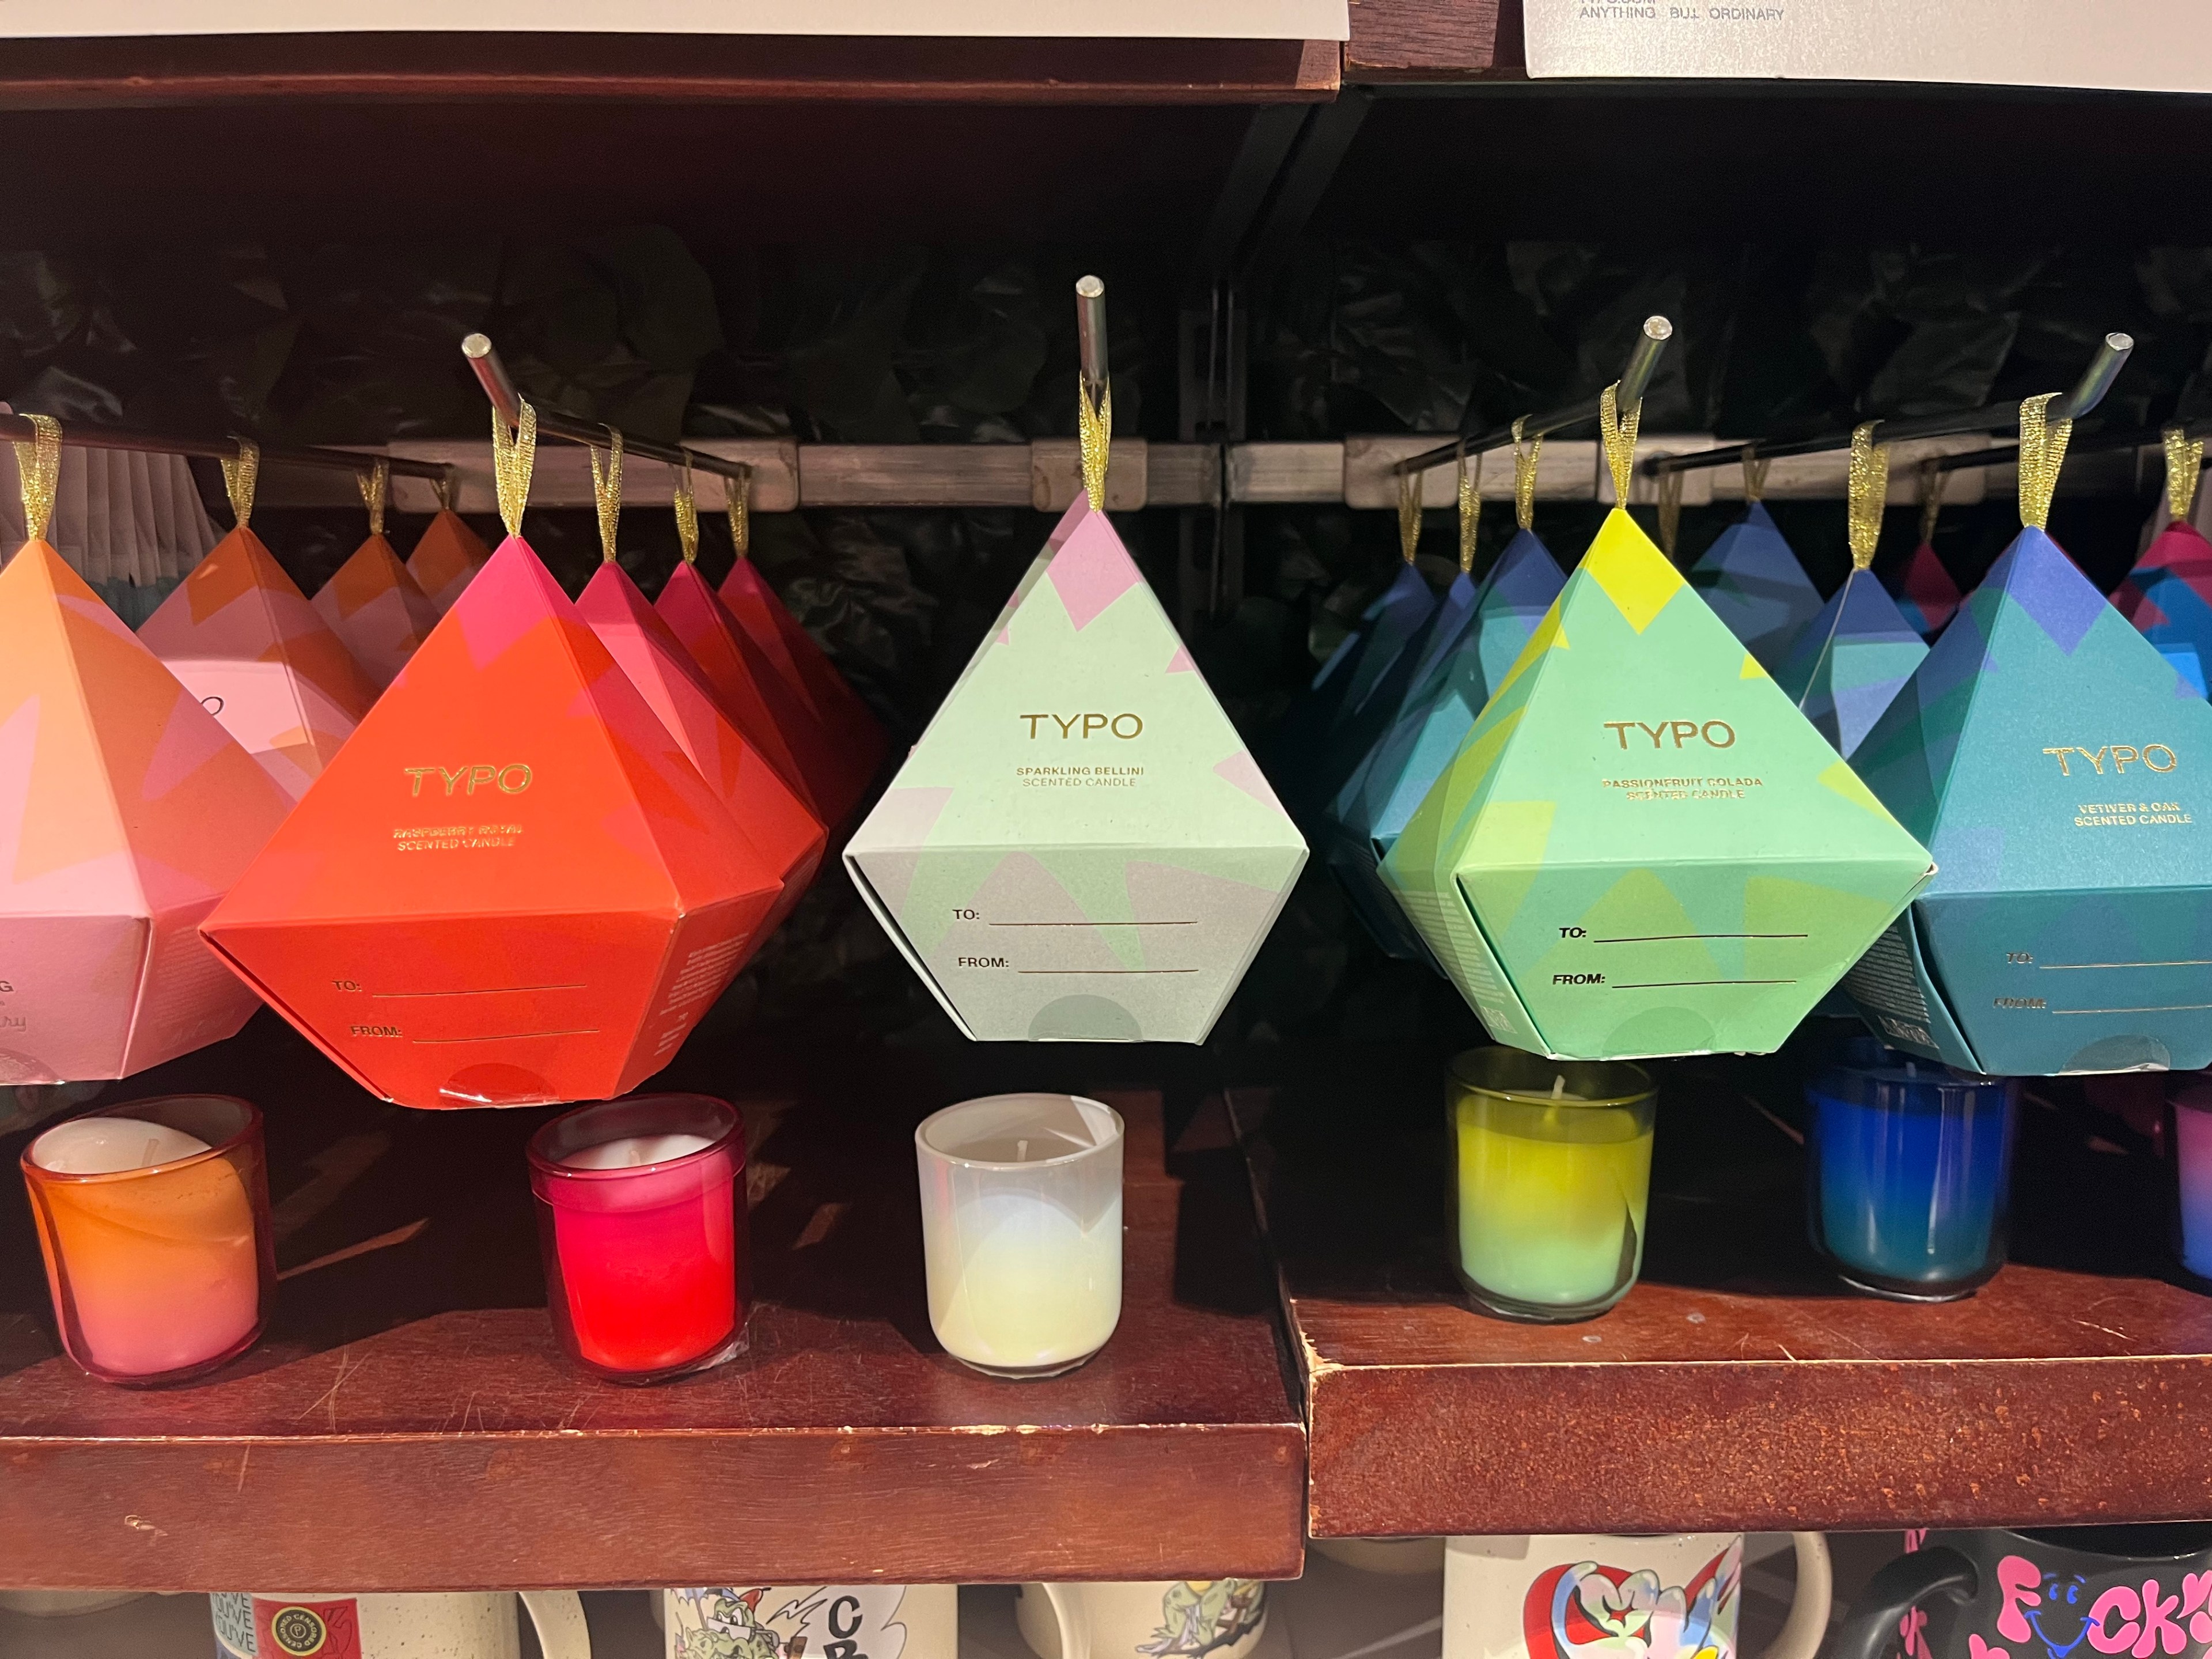 Selected scented candles in octahedral box.